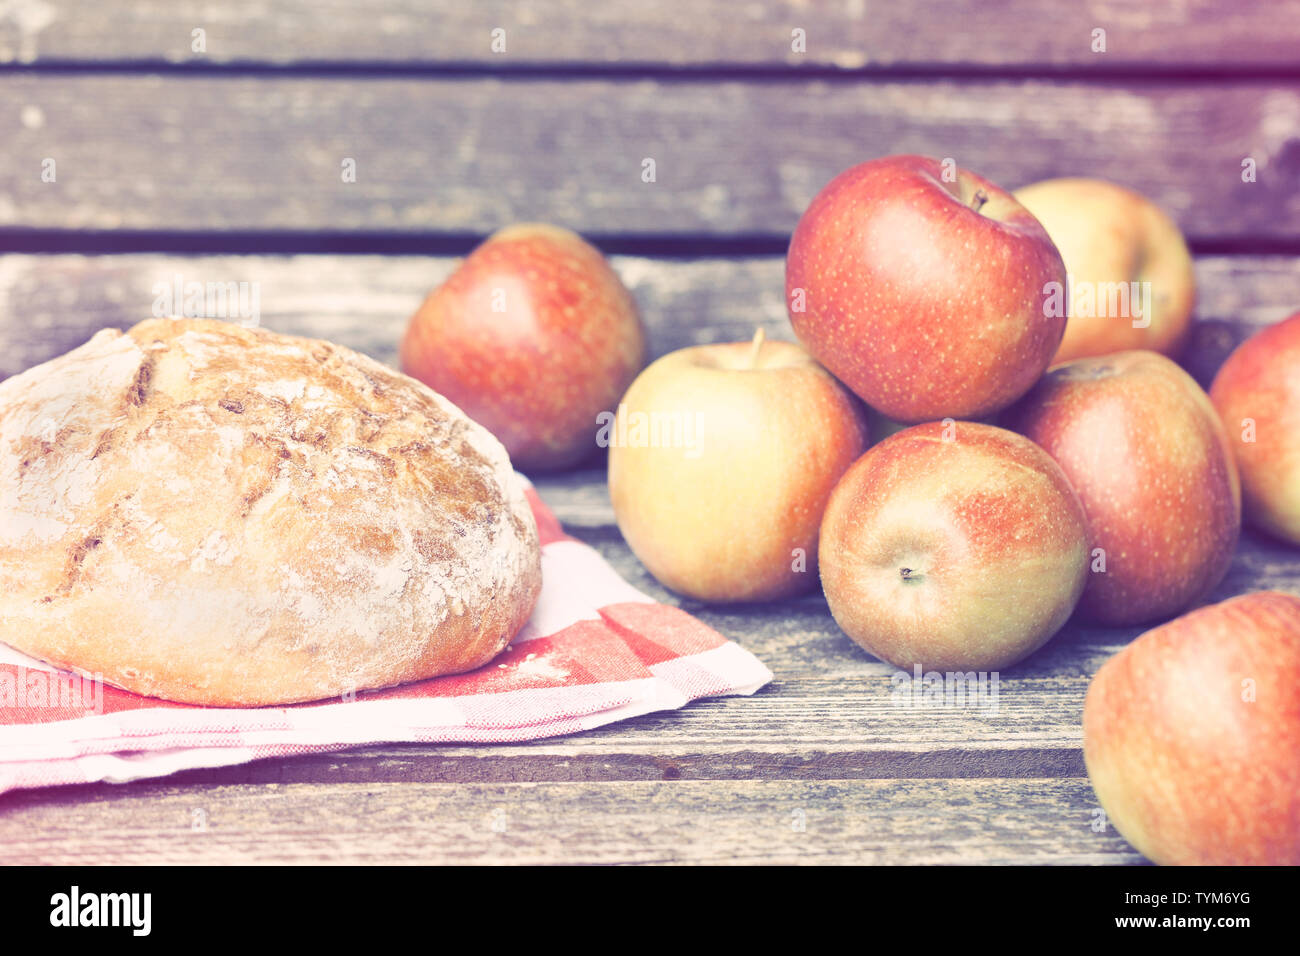 Bread and Apples on a bench Stock Photo